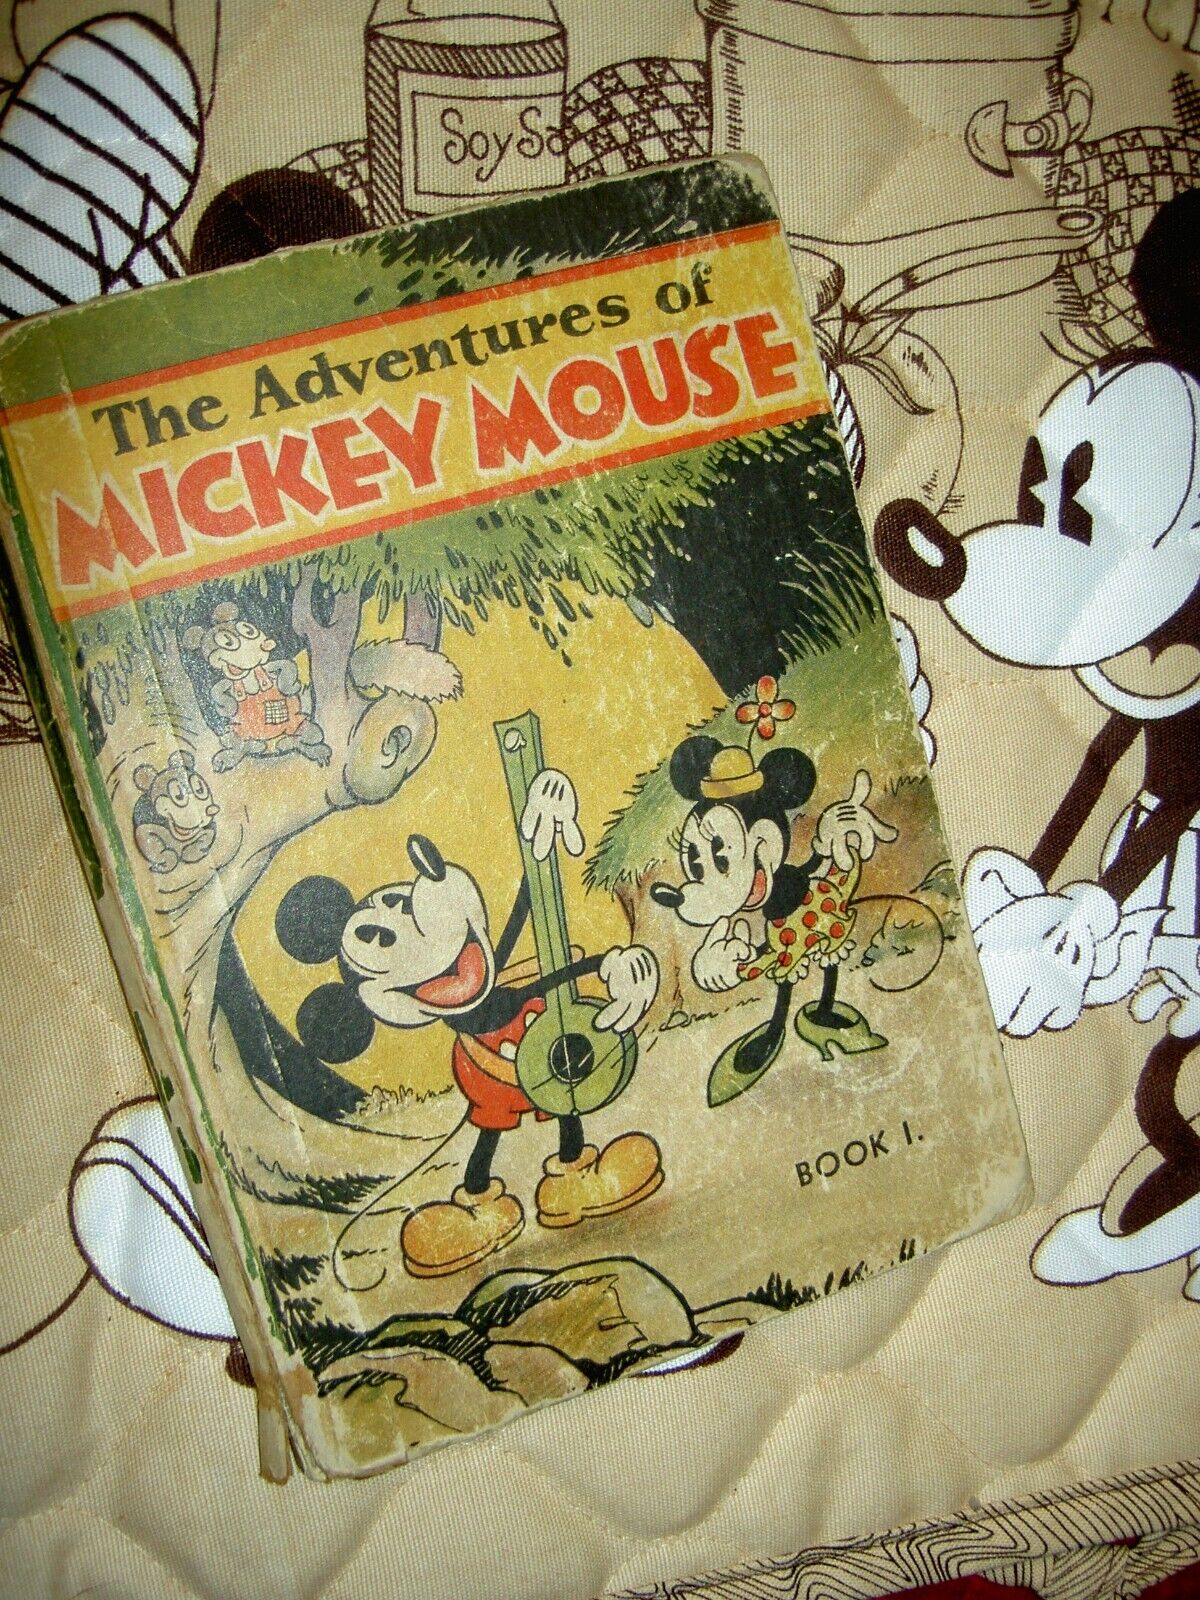 RARE 1931 First Edition, THE ADVENTURES OF MICKEY MOUSE Book 1, Walt Disney book